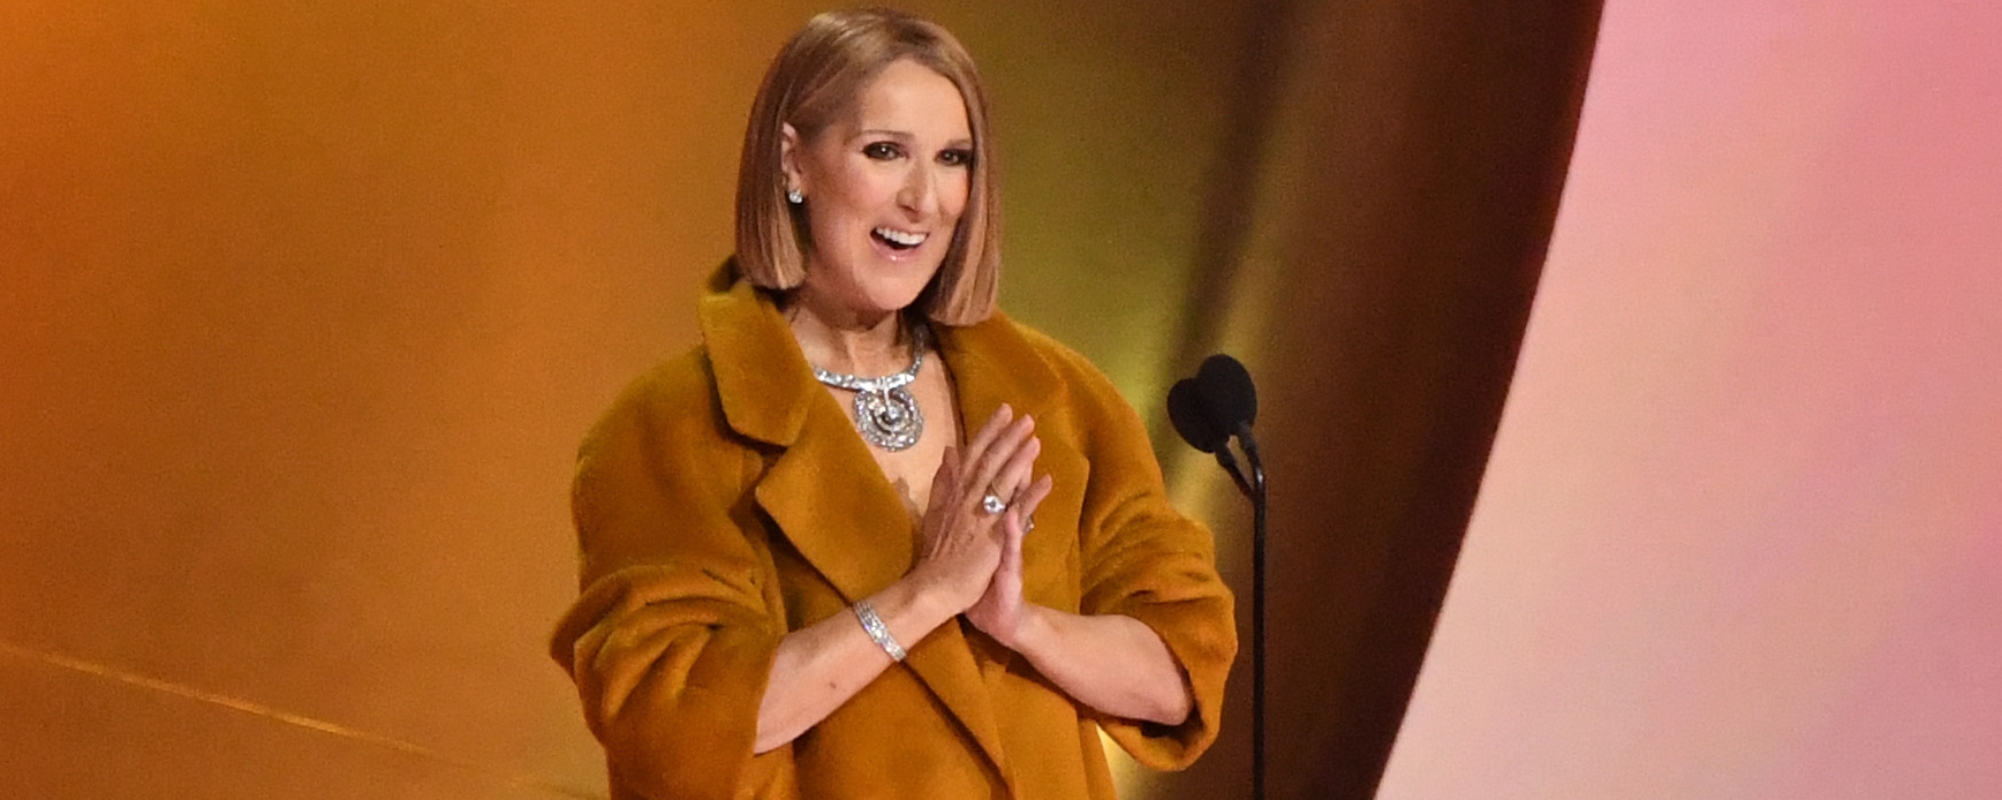 Celine Dion Performs Impromptu Harmonies After the GRAMMYs, Proving She’s Still Got It Amid Health Battle